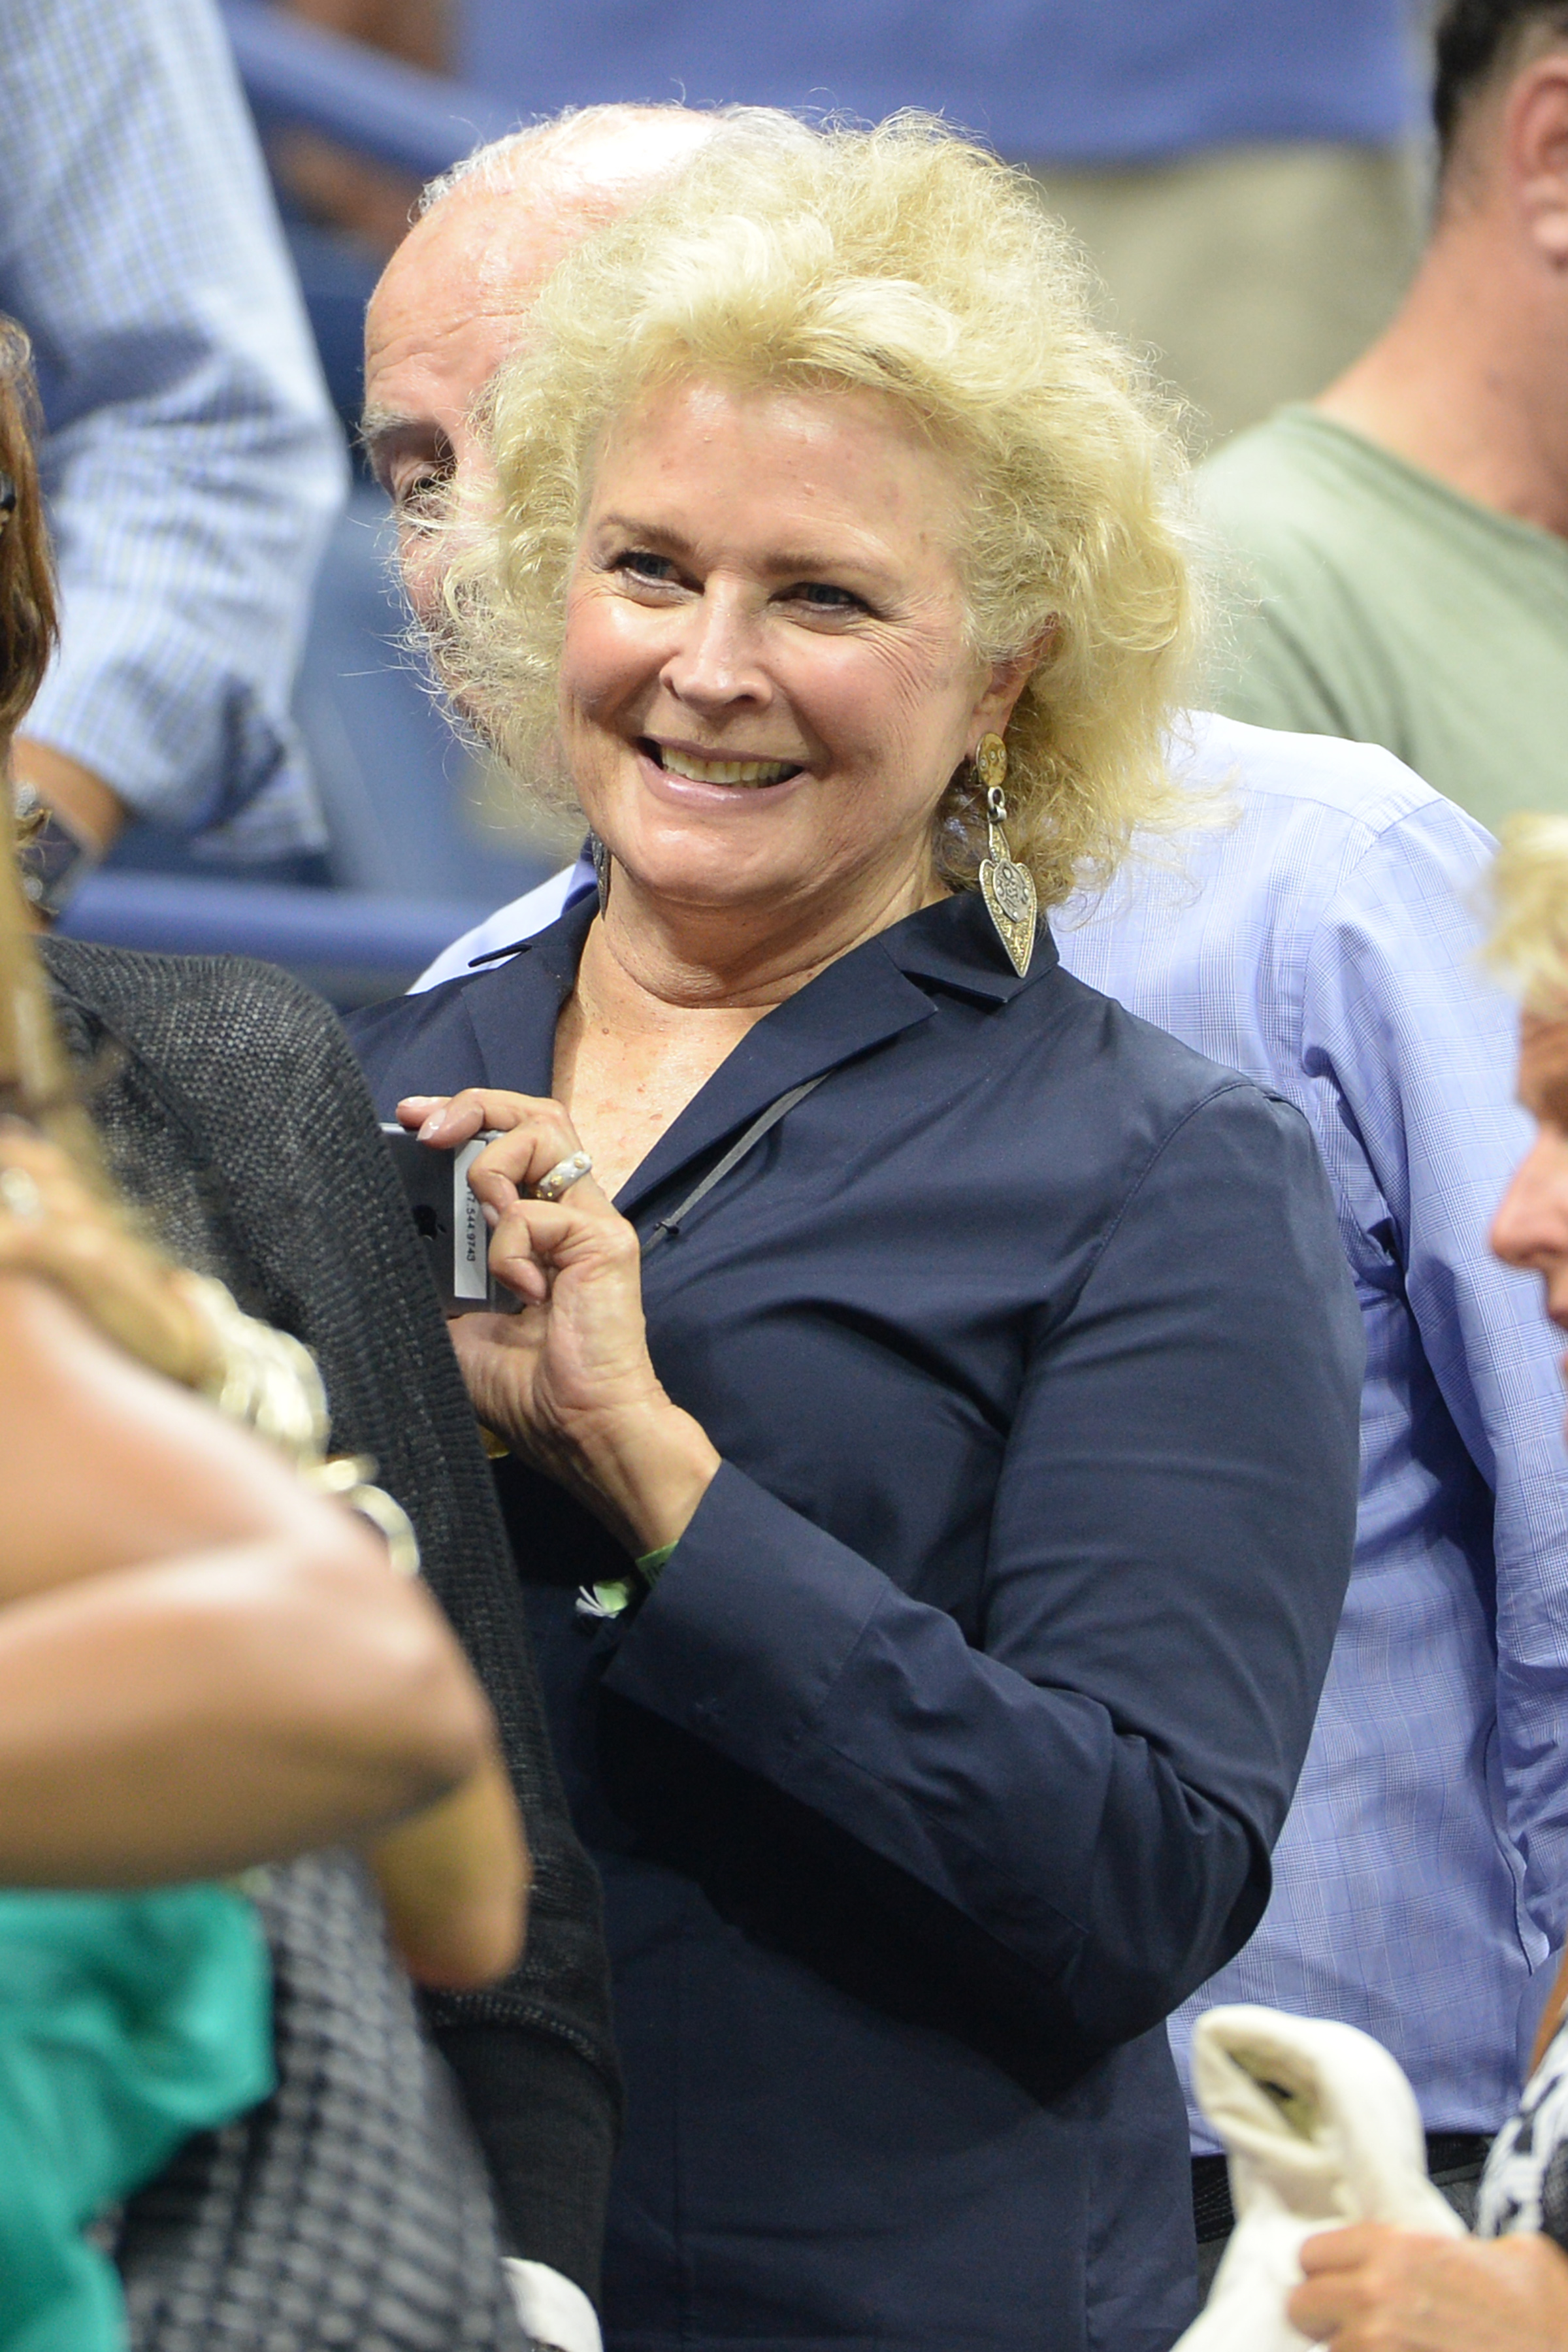 Candice Bergen attends day 9 of the 2015 US Open at USTA Billie Jean King National Tennis Center on September 8, 2015 in New York City | Source: Getty mages